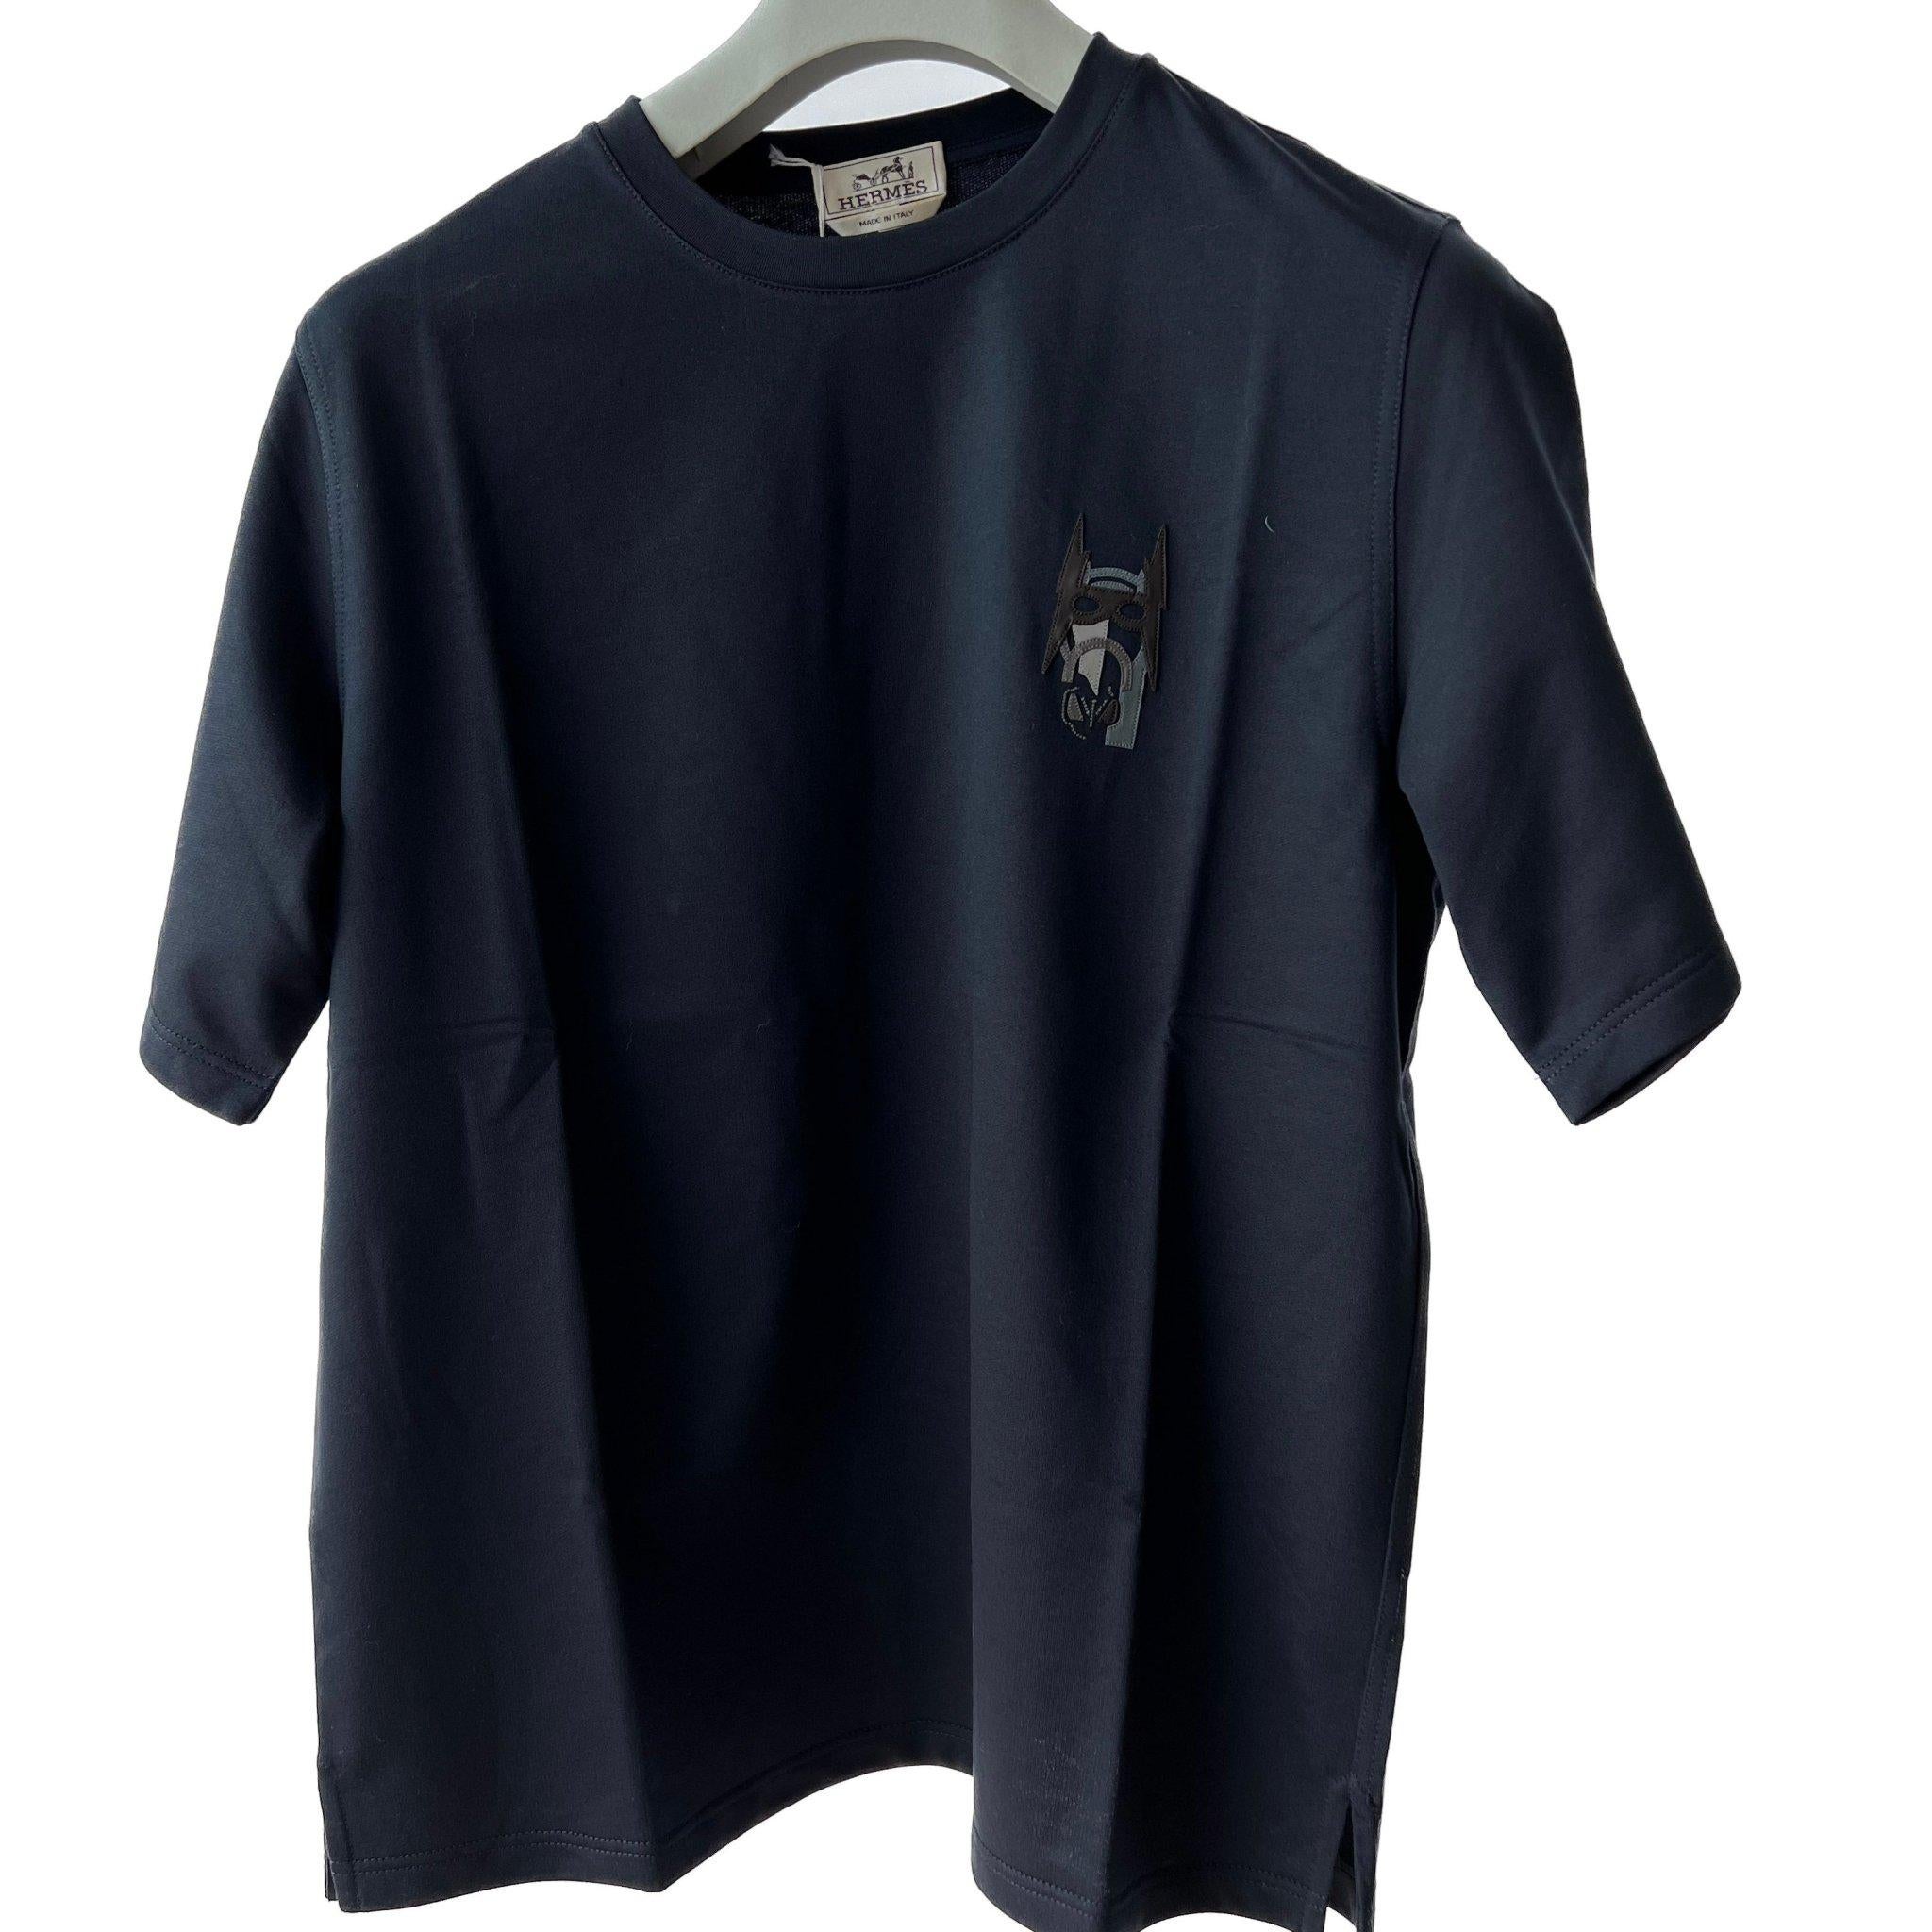 The Hermes Mini Patch Cuir t-shirt is made from 100% cotton and comes in the blue shade Marine. It features the 'Super H' patch on the top right front. 

Brand: Hermès

Colour: Marine (Blue)

Material: 100% Cotton

Size: Medium

Condition: Unworn.